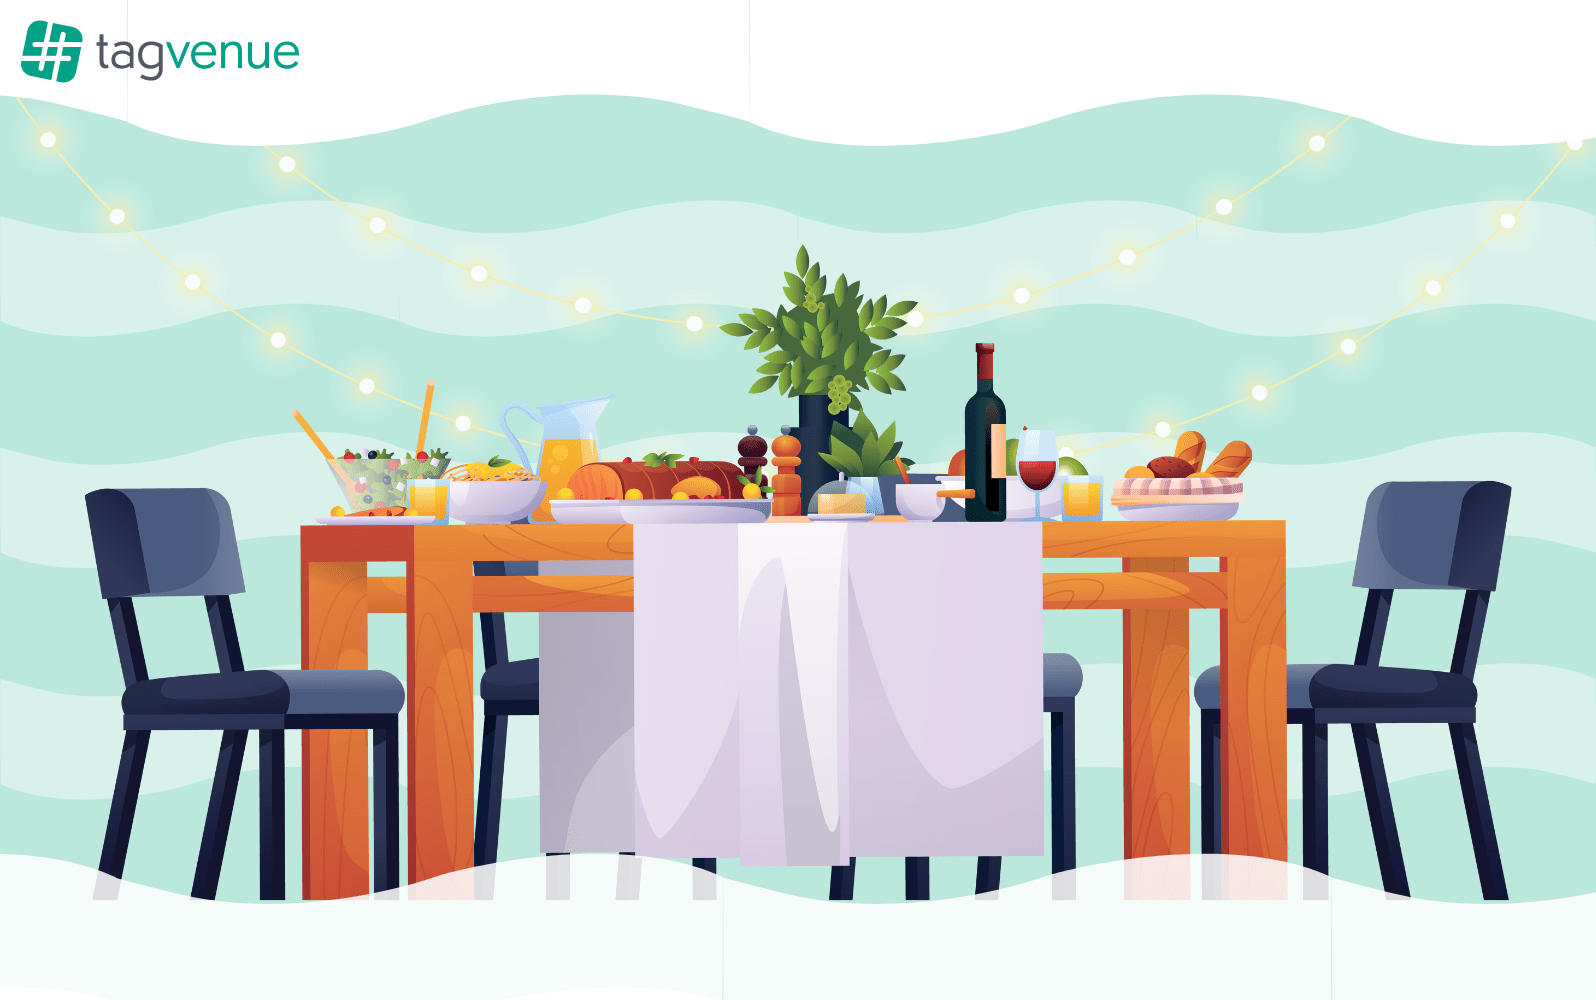 Hosting a memorable dinner party at your home